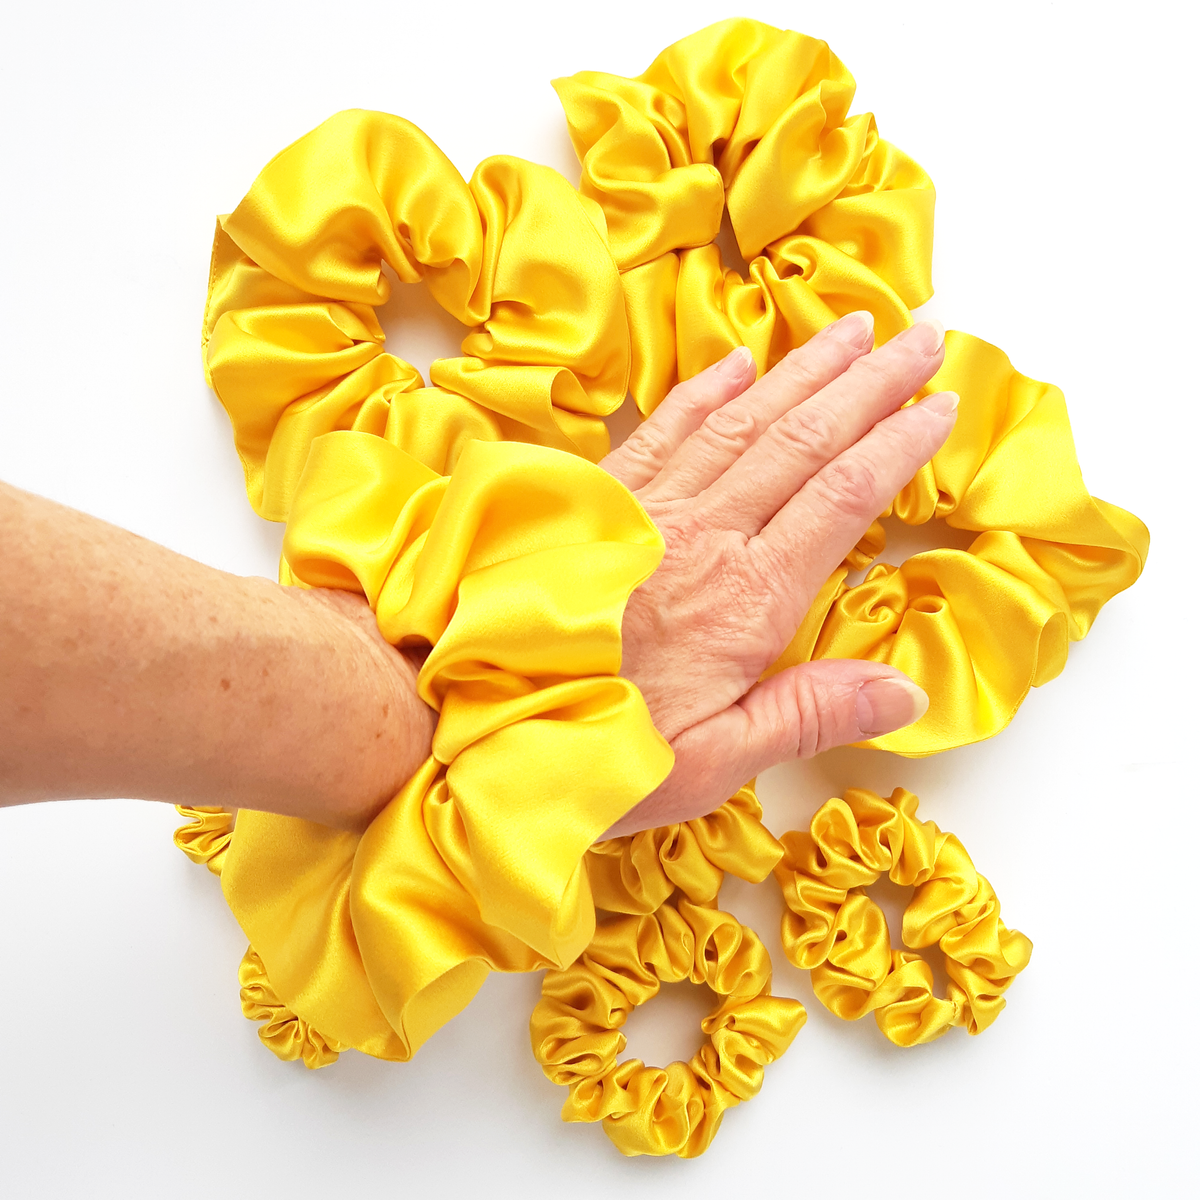 Aesthetic Scrunchie Pictures Wallpapers